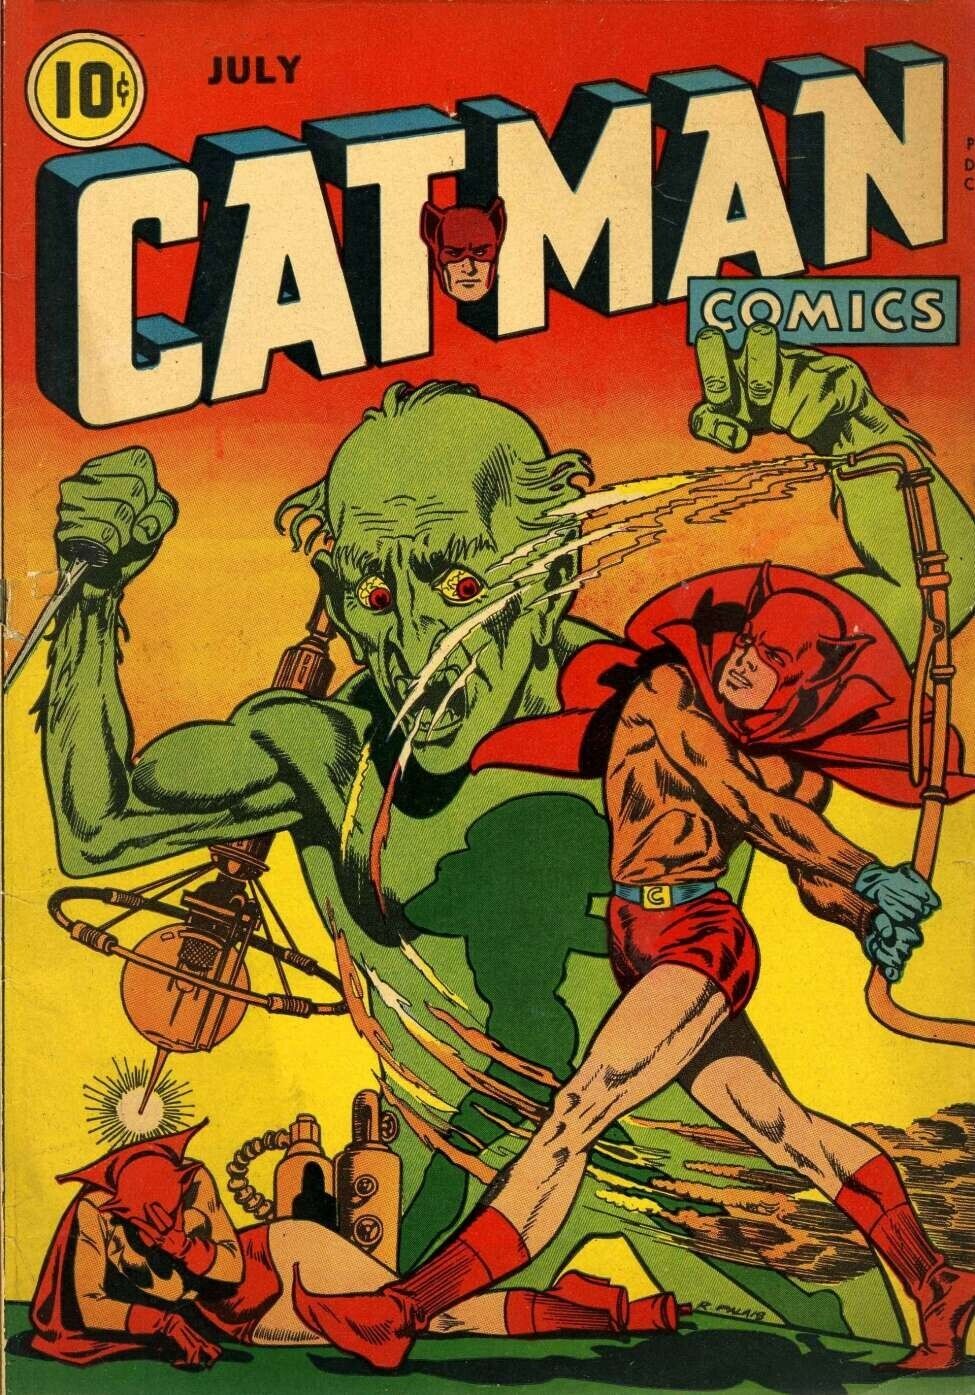 CATMAN COMICS #25, (1944) *** VERY SCARCE WWII,  Incomplete with only one story